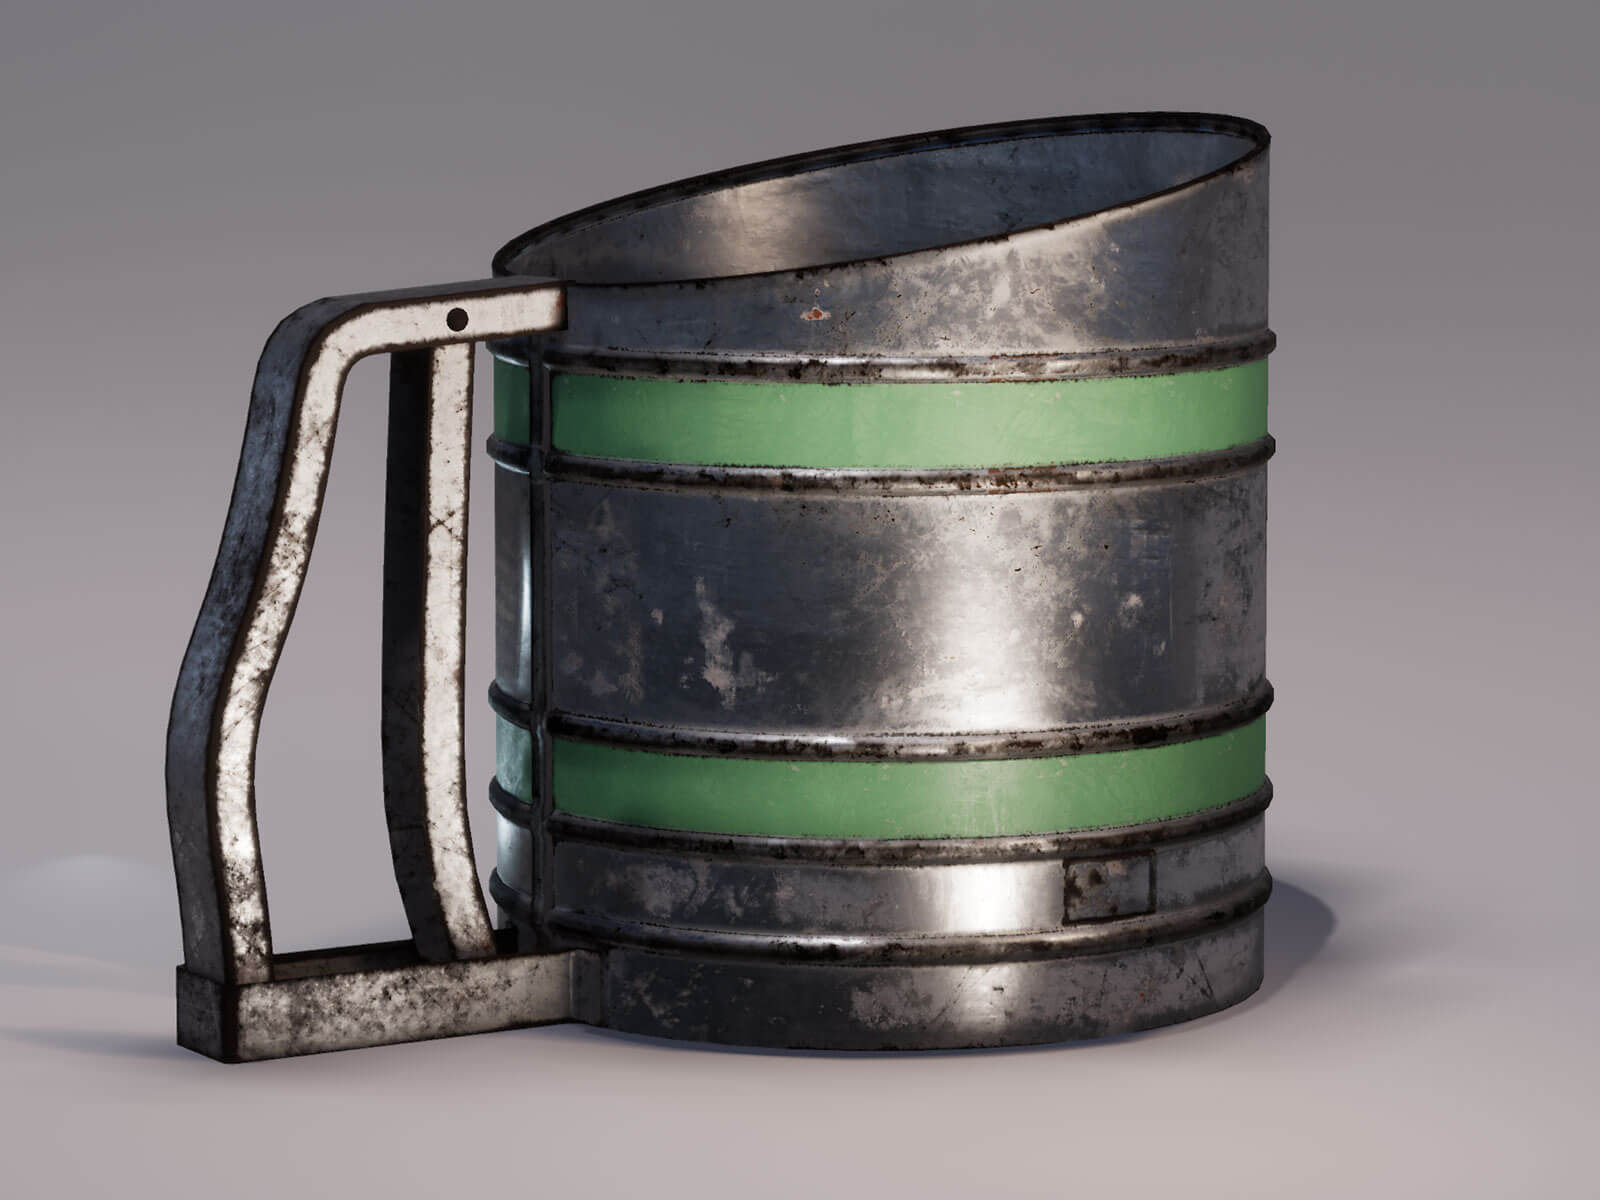 A makeshift, naked-metal mug with green trimming is pockmarked with rust and other wearing.